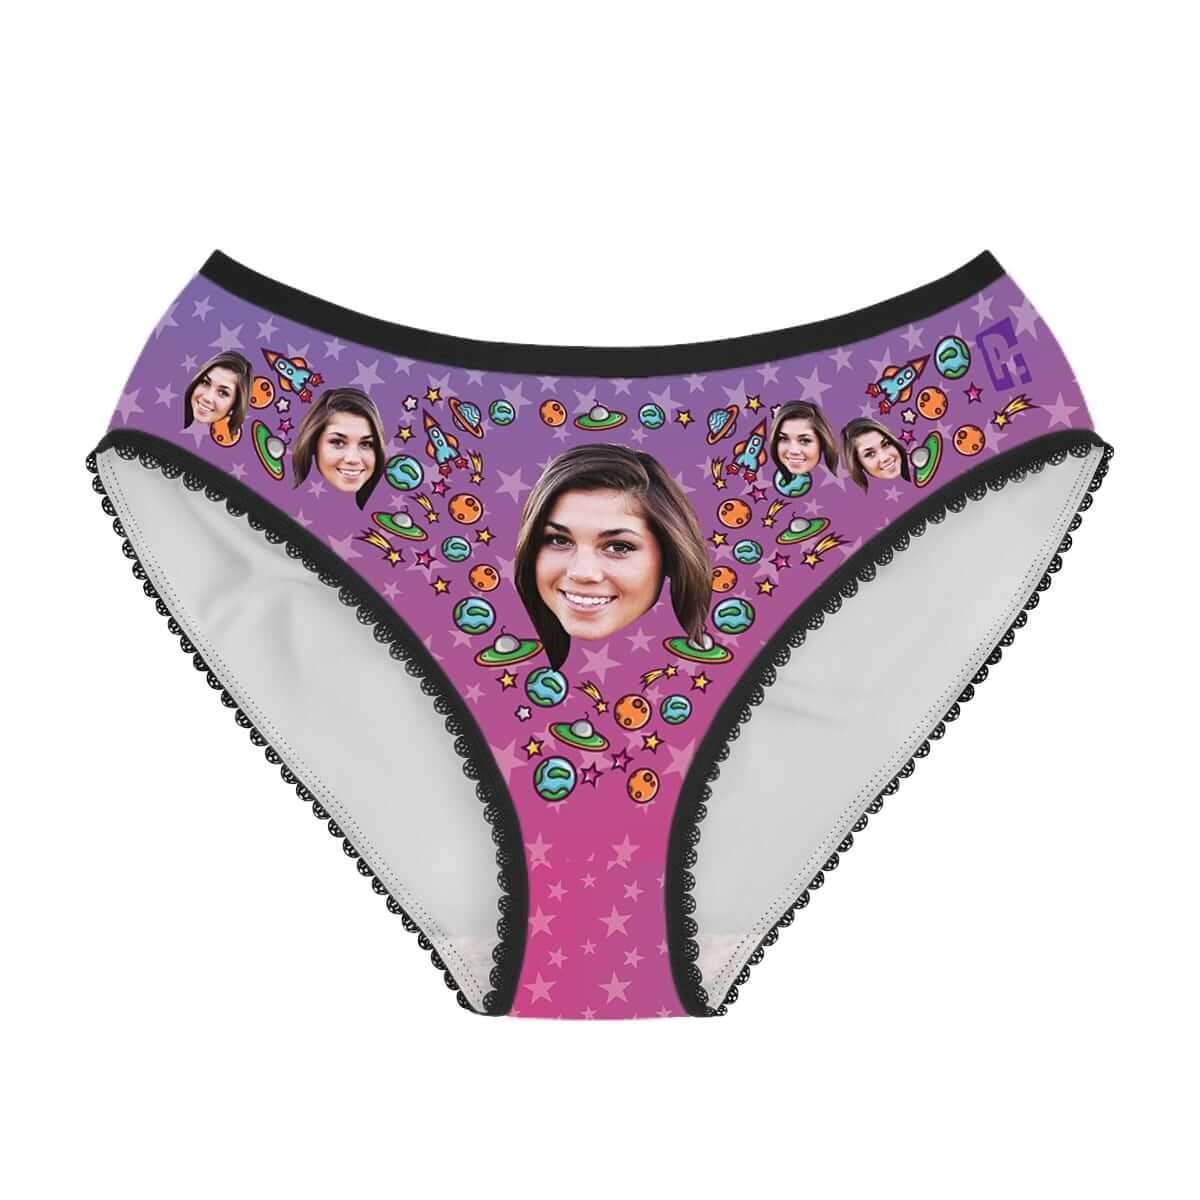 Rockets Rockets women's underwear briefs personalized with photo printed on them